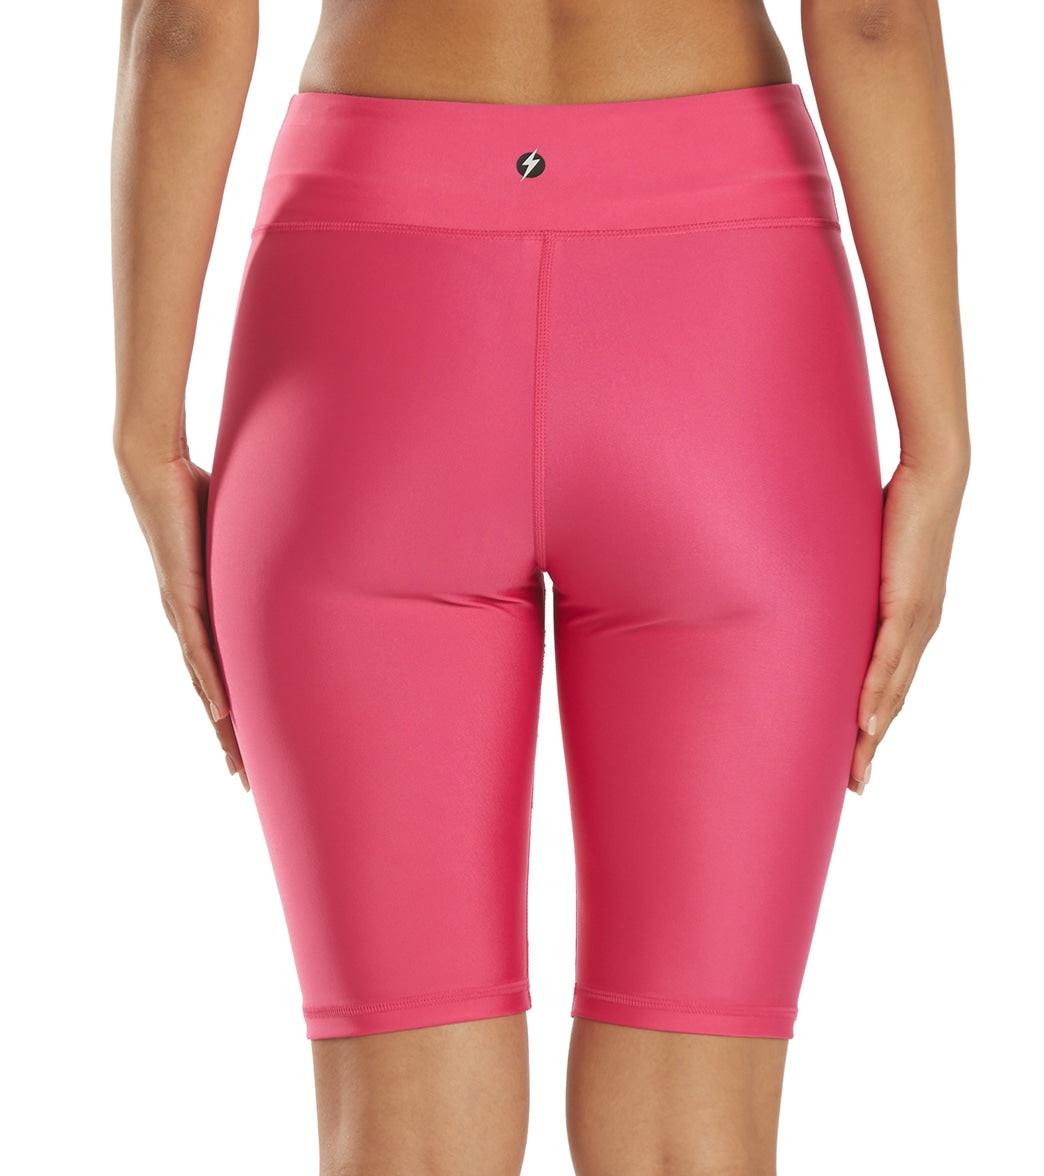 Electric Yoga Basic Short at YogaOutlet.com - Free Shipping –